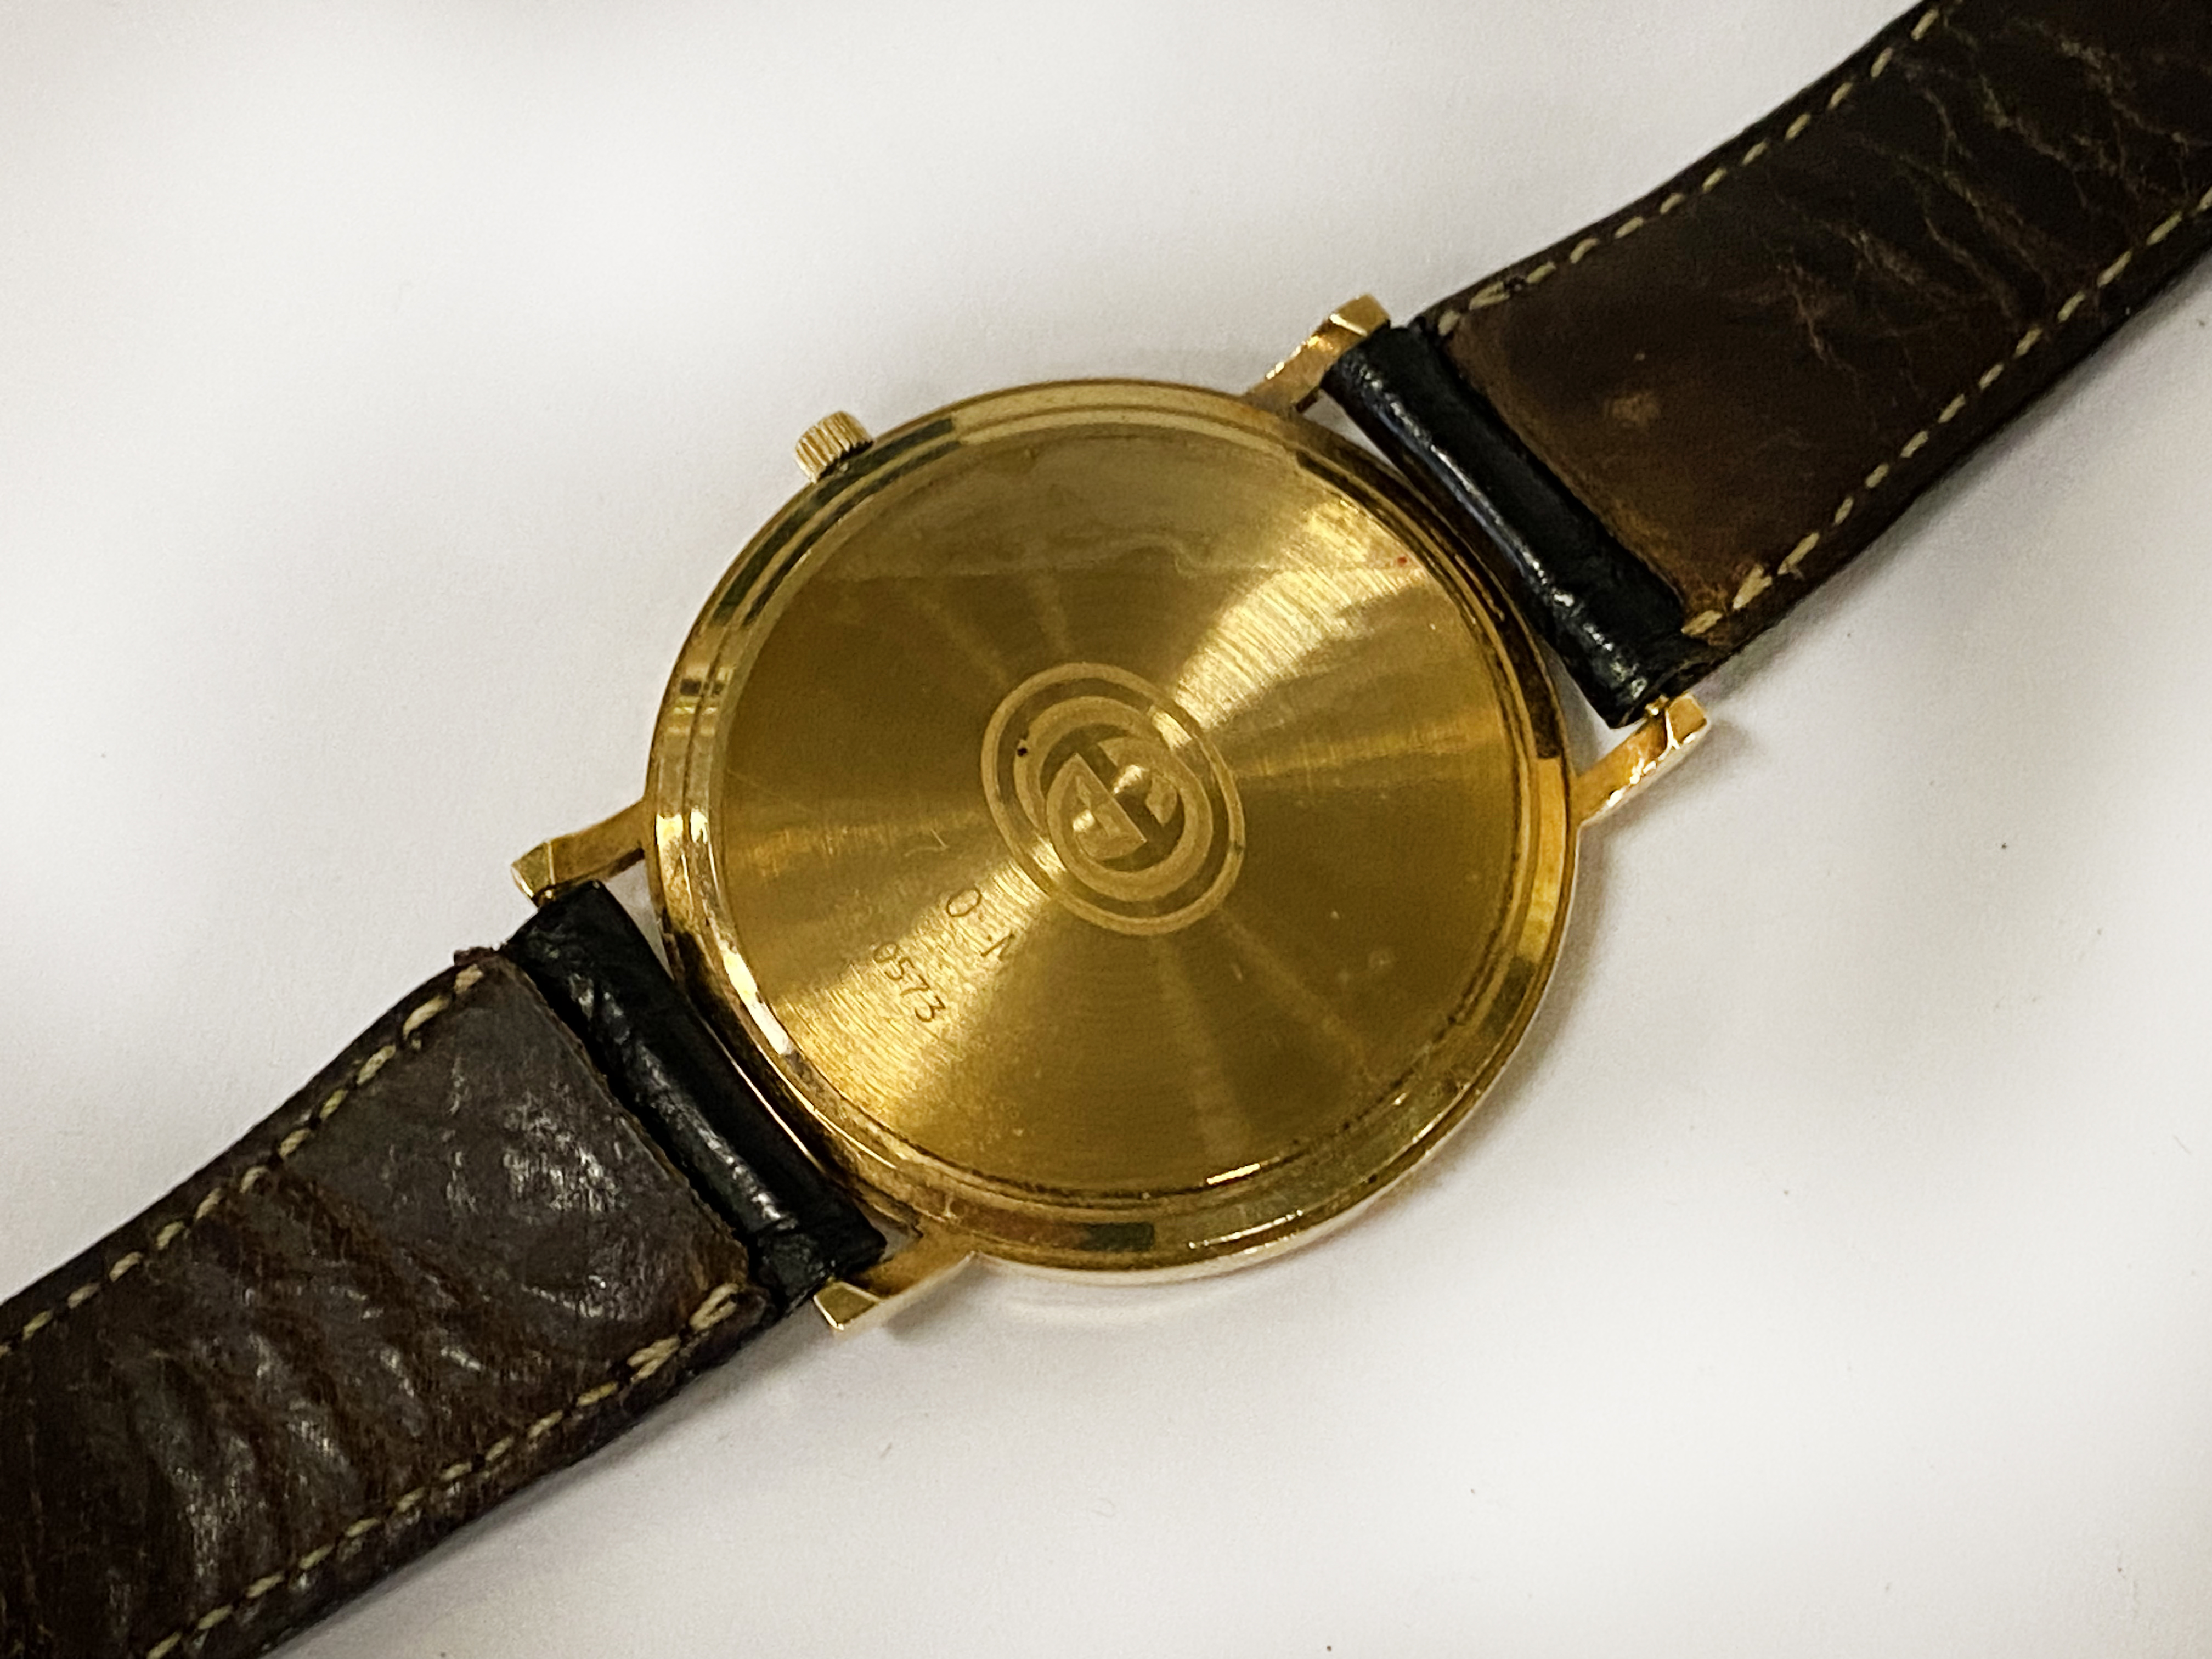 18CT GOLD GUCCI WRISTWATCH - Image 2 of 2